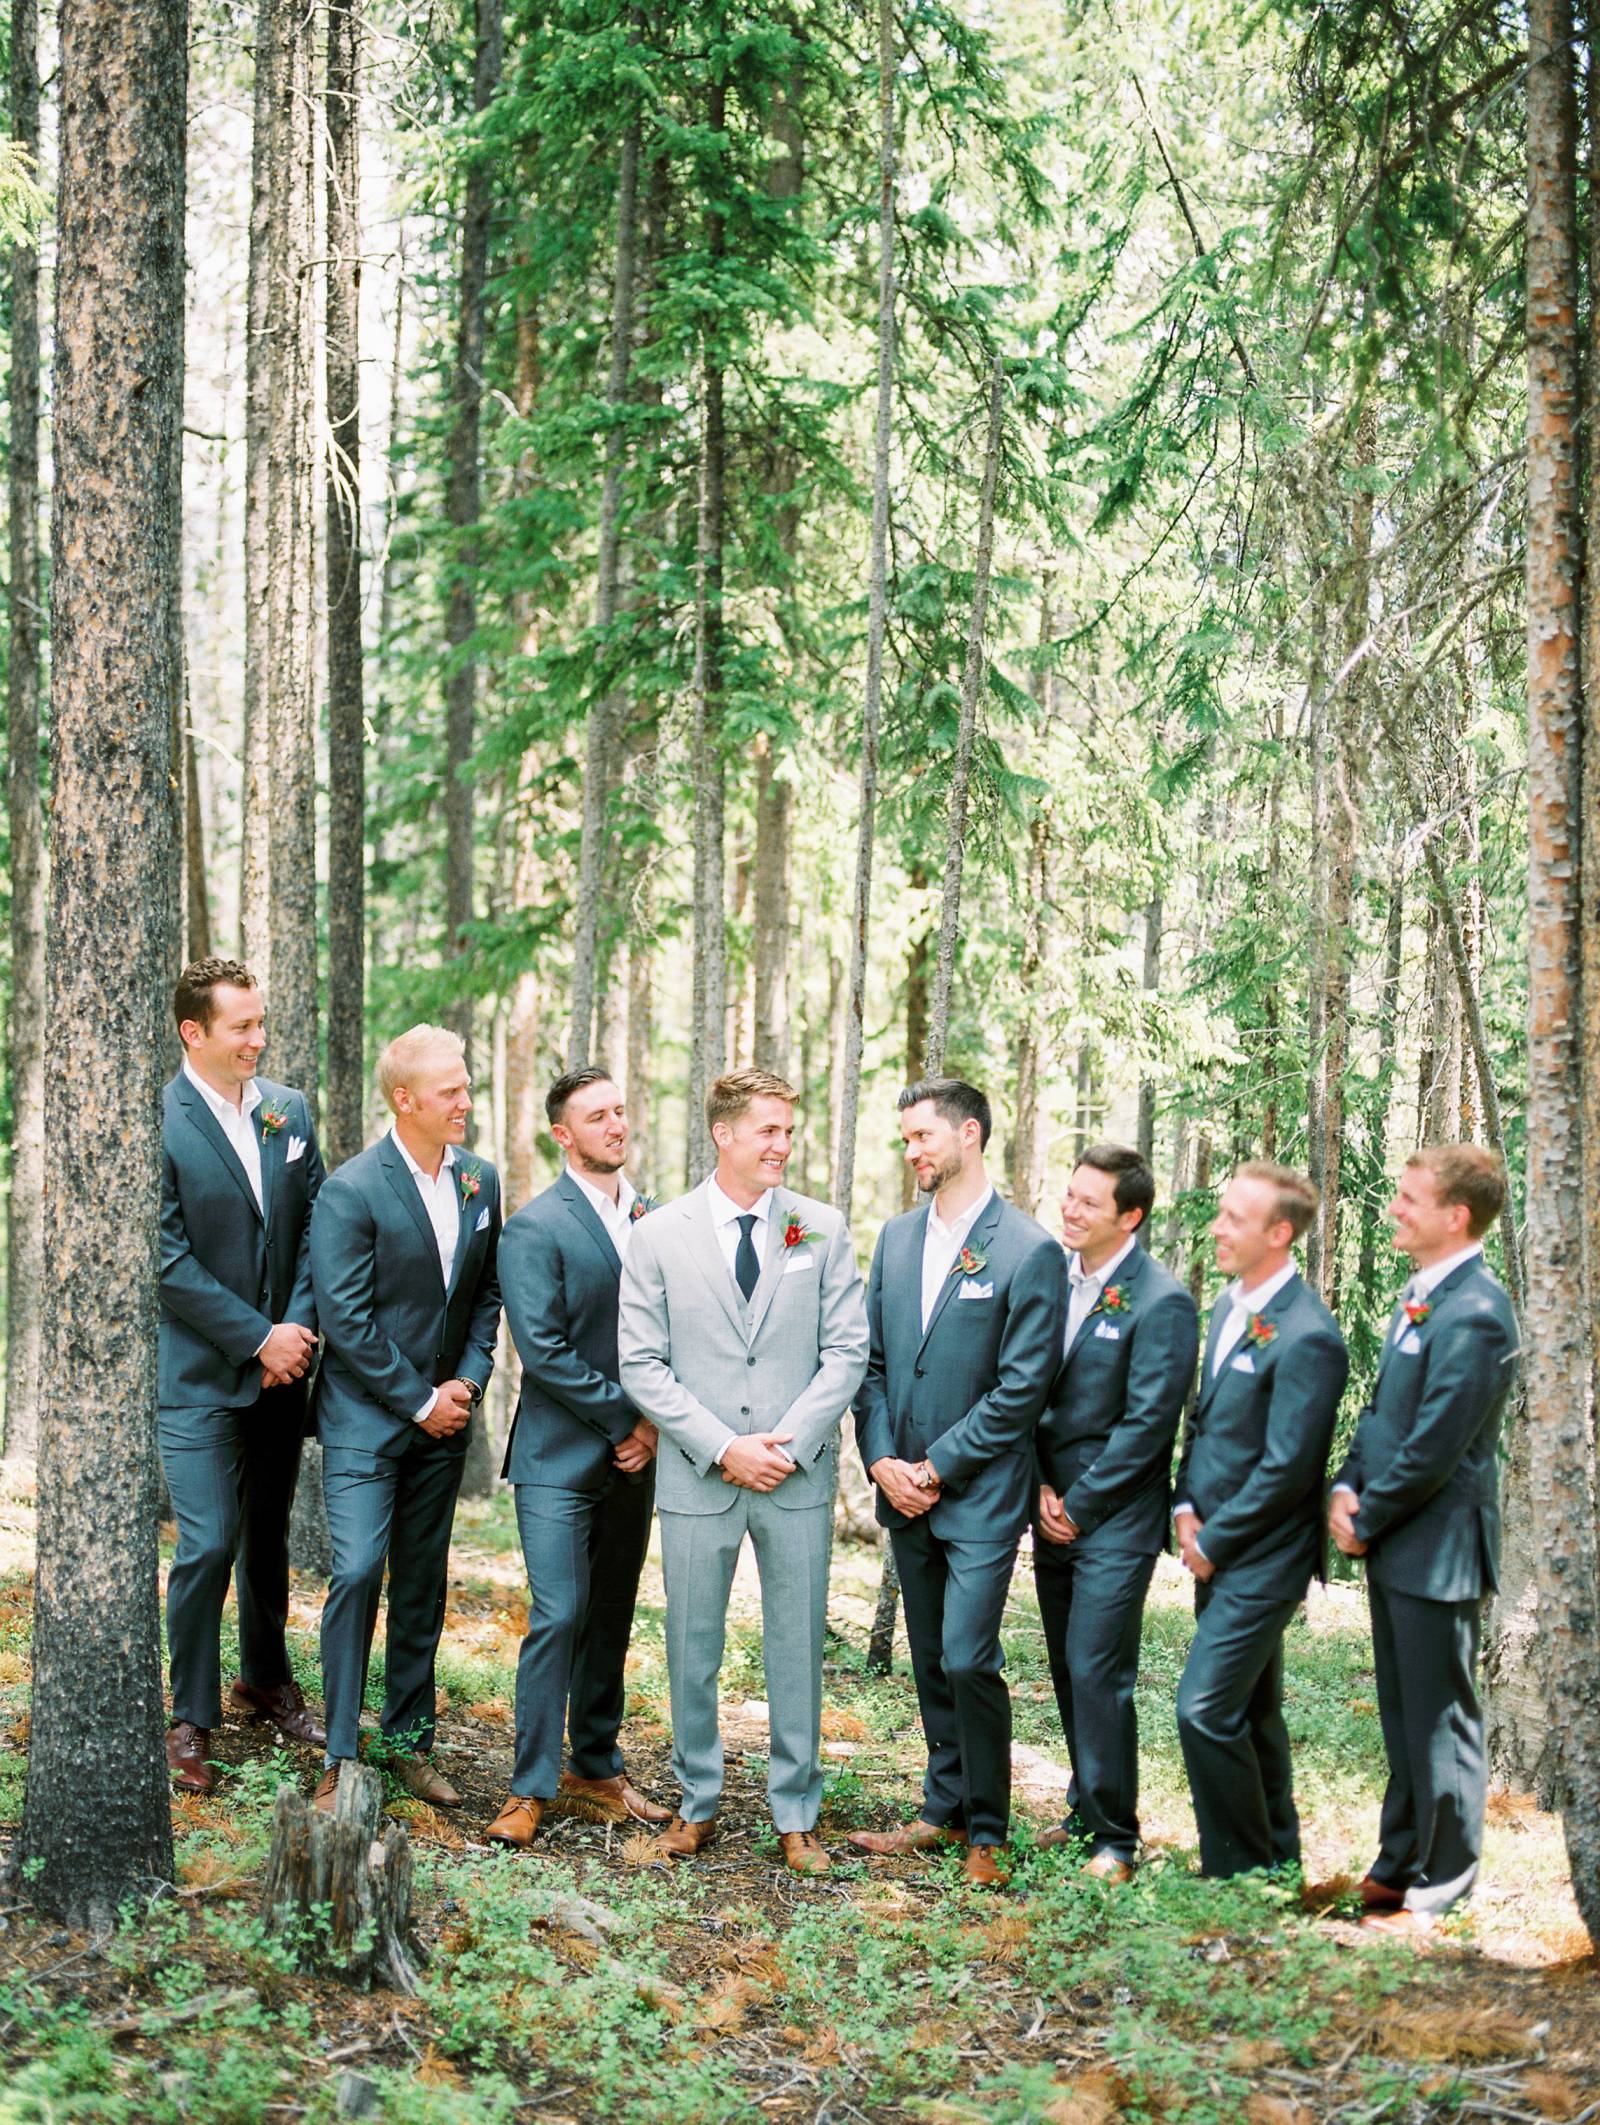 Winter Park Colorado Wedding inspired by nature | Winter Park Real Weddings